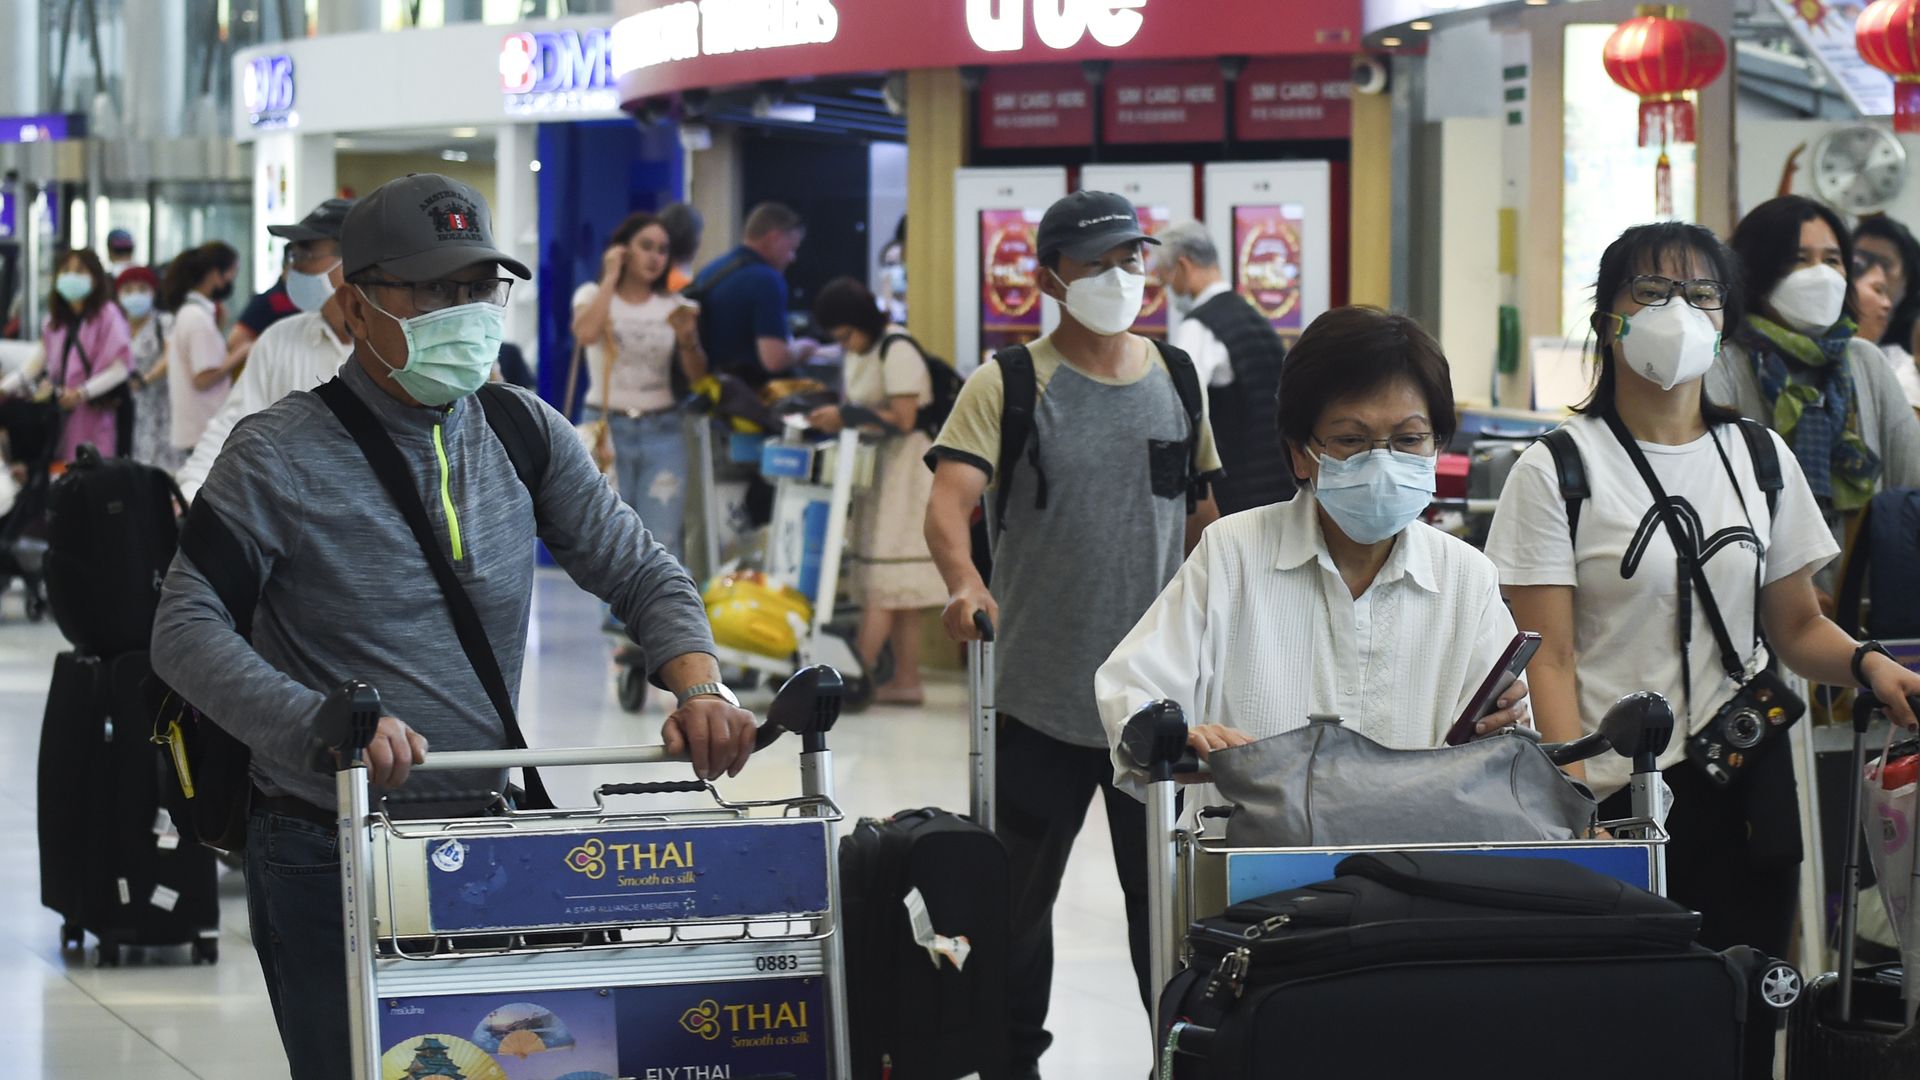 People wearing surgical masks at an airport.